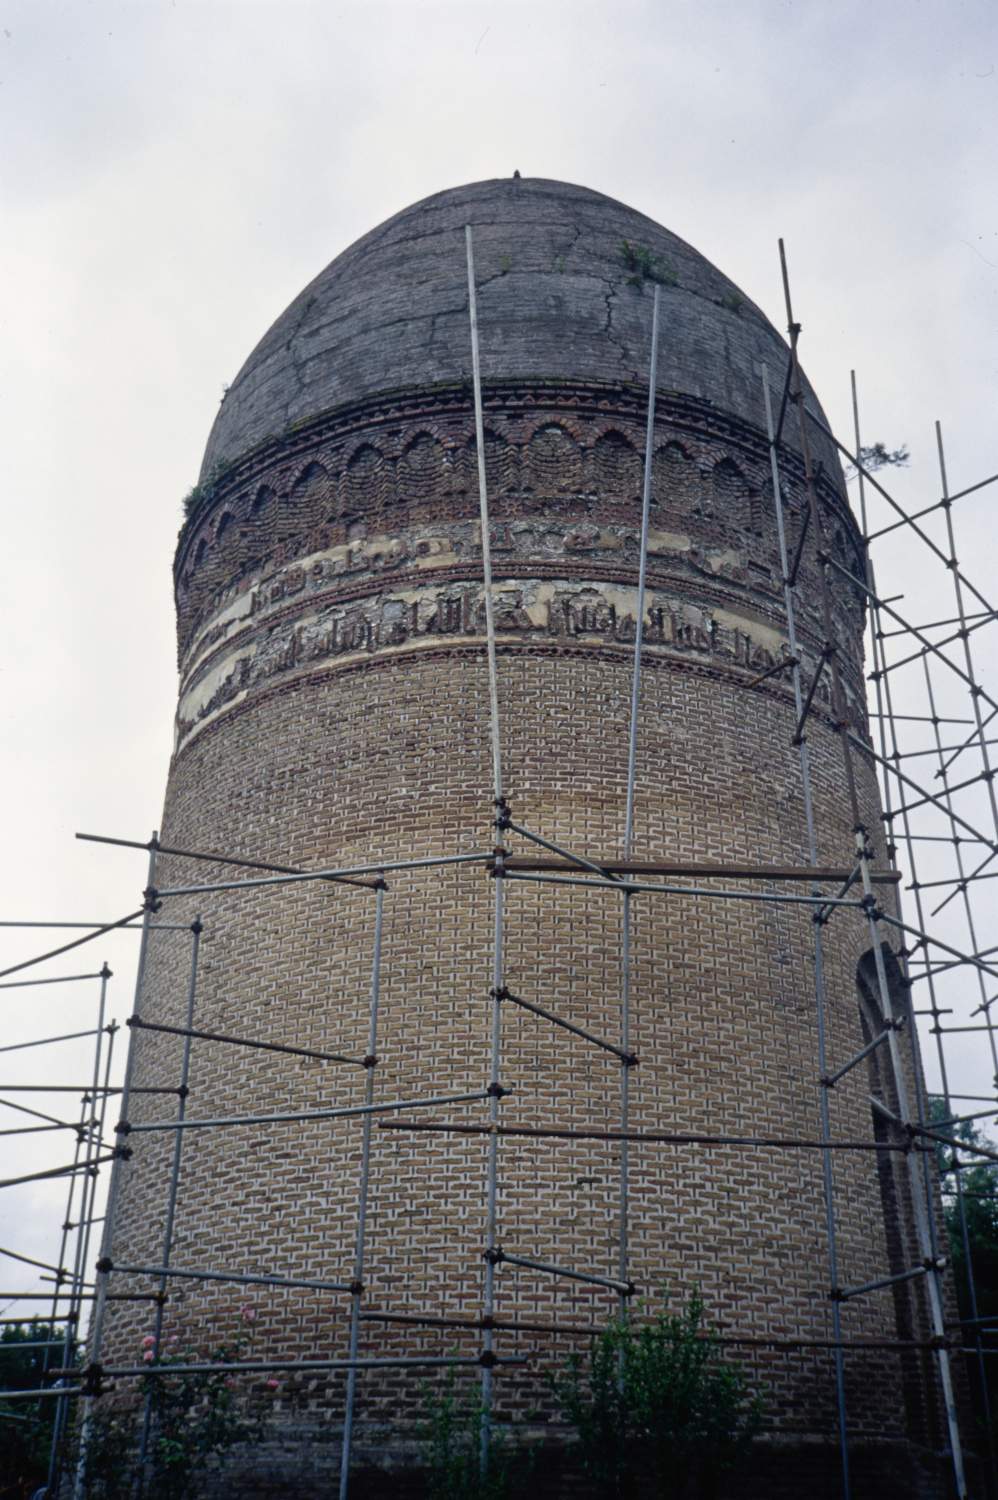 Exterior view showing inscription bands. Scaffolding for a restoration project surrounds the building.&nbsp;